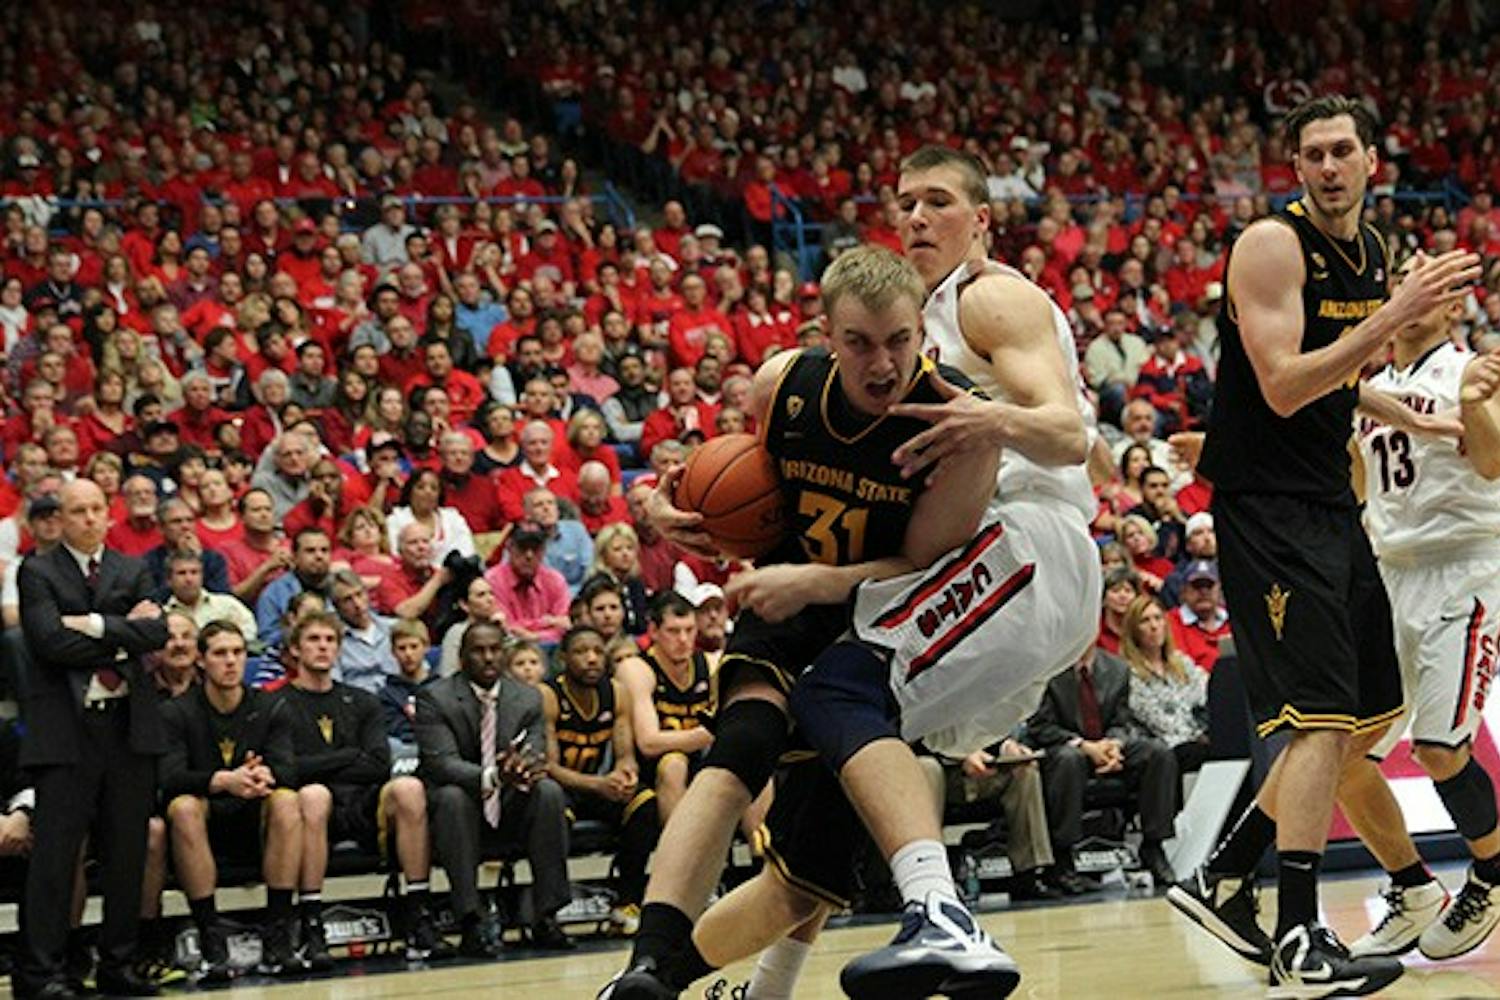 Sophomore forward Jonathan Gilling takes the ball to the hoop against UA in Tucson. Gilling hails from Denmark and in the 2011-2012 season had 21 points against UA overall, according to thesundevils.com. (Photo by Dominic Valente)